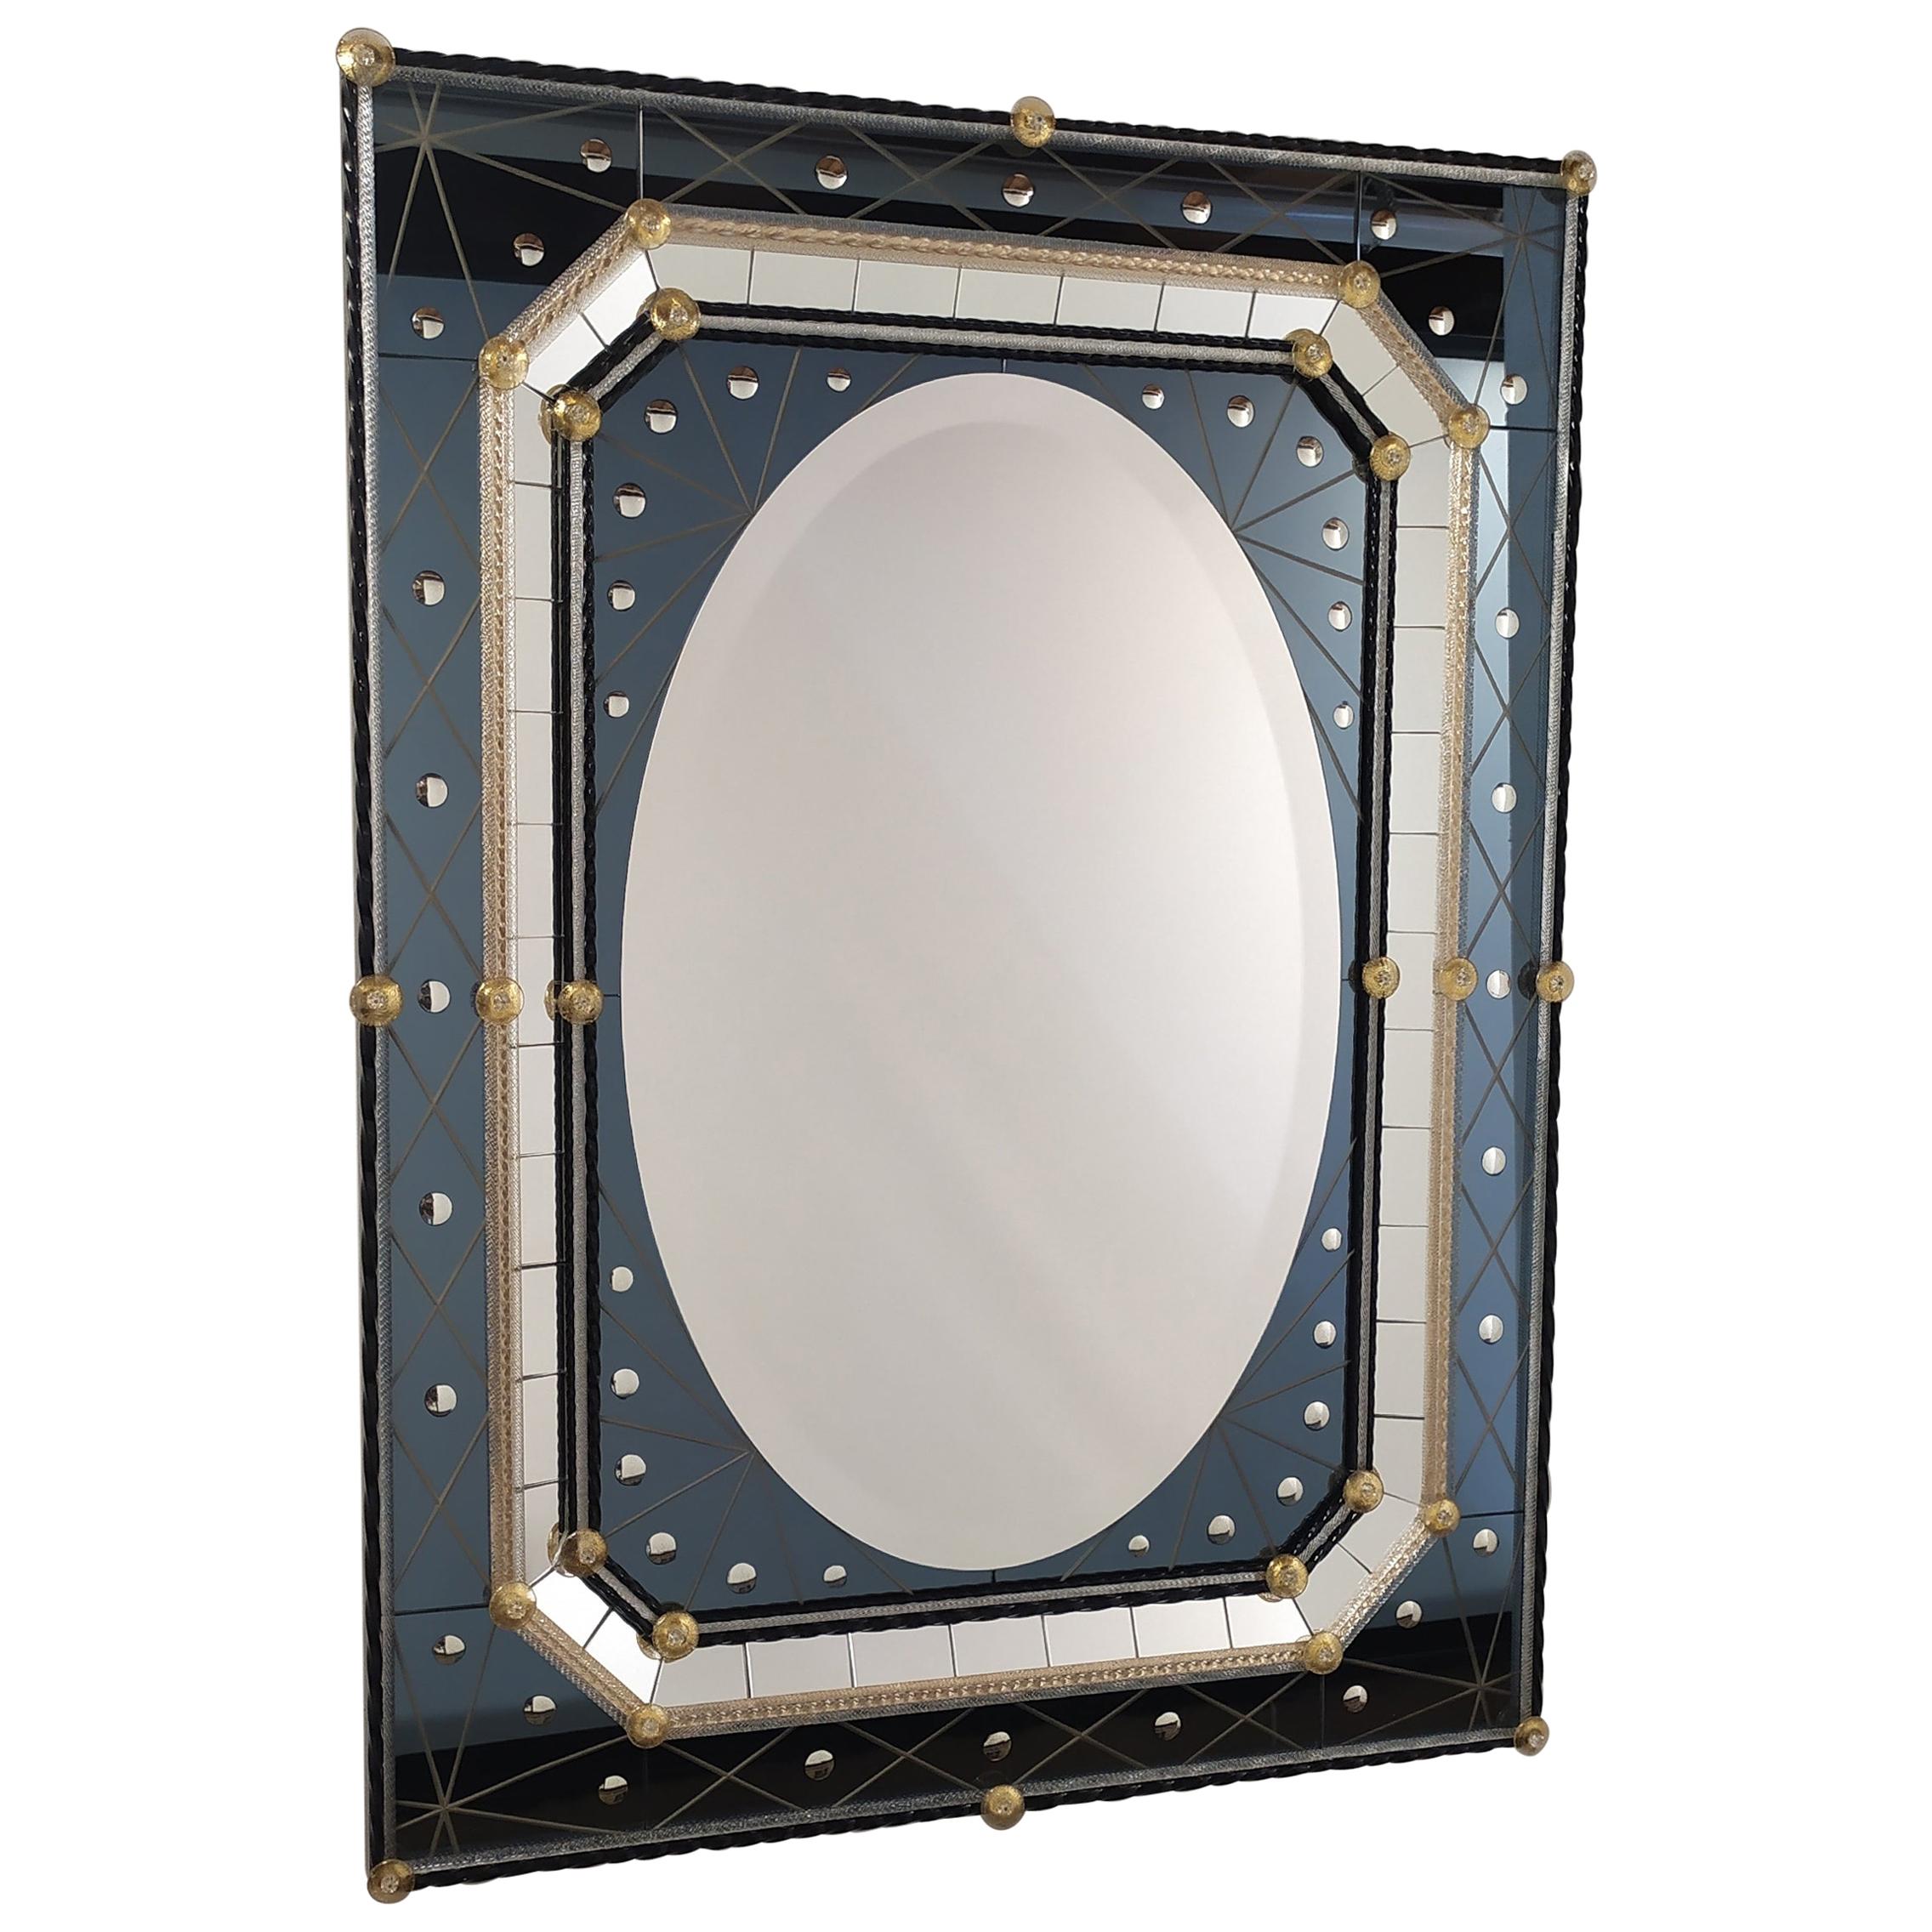 Murano Glass Mirror with Polished Bubbles Engraving on Steel-Colored Mirror